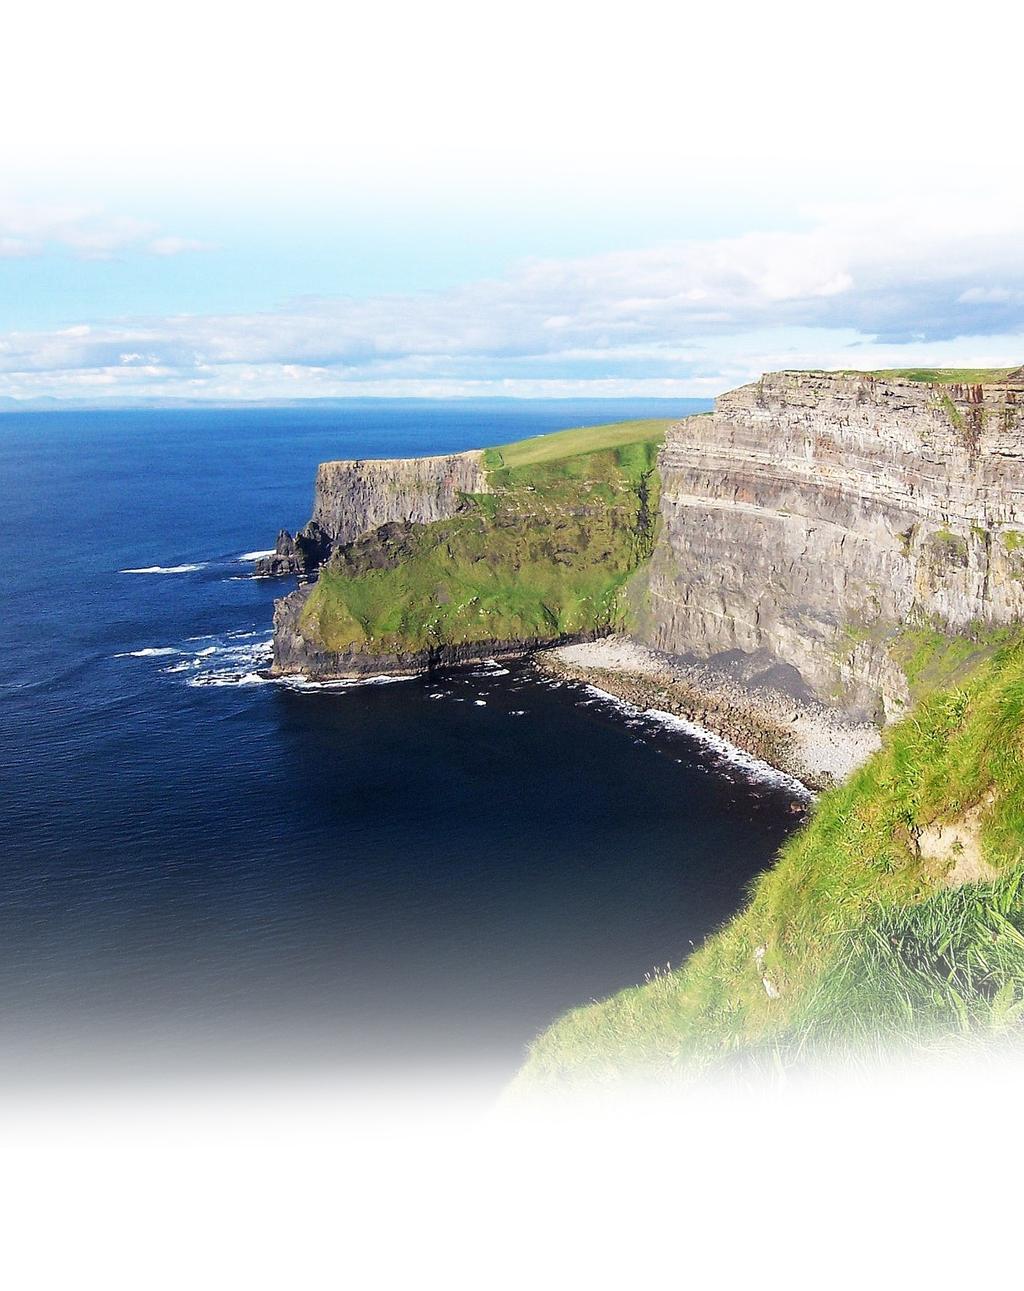 Irish Discovery August 18-28, 2019 Featuring a 10 Day Tour